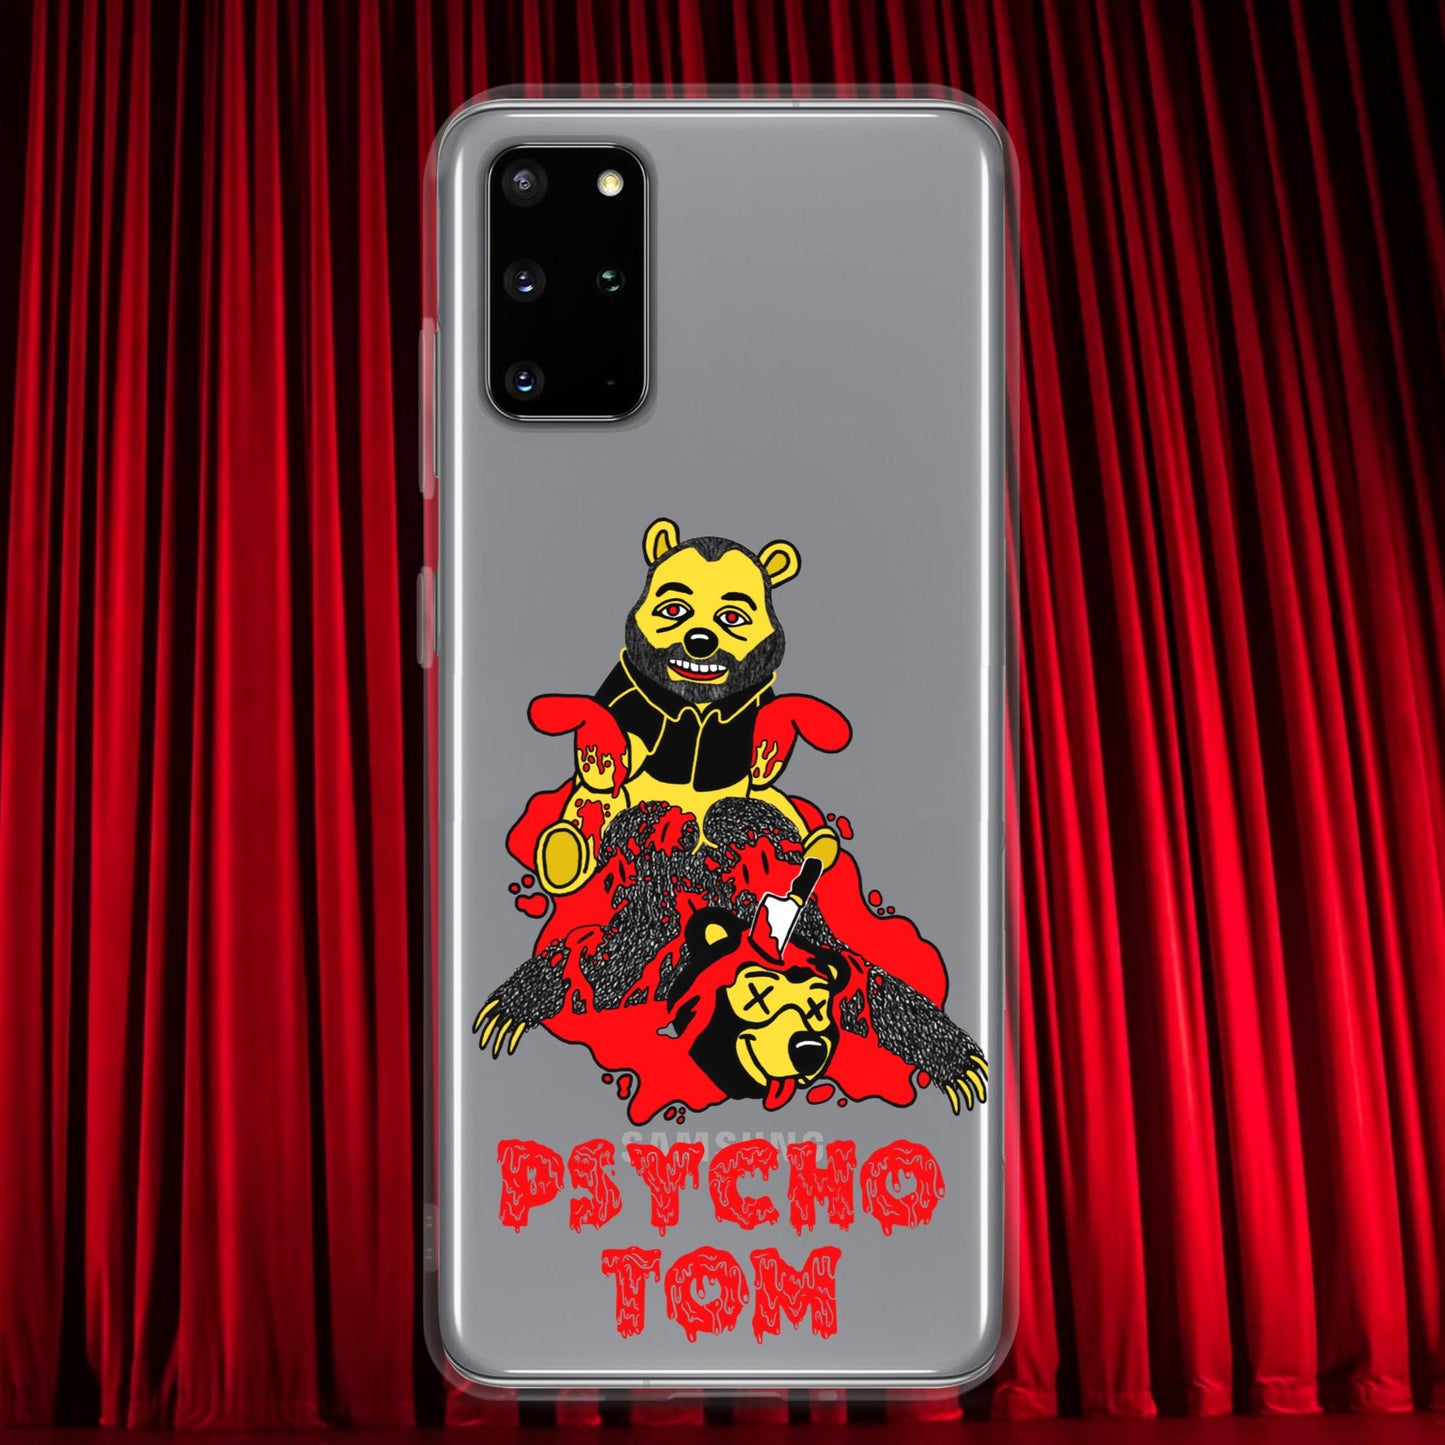 Psycho Tom Segura Clear Case for Samsung, Tom Segura Samsung case, Tom Segura phone case, 2b1c phone case, 2 Bears 1 Cave merch, YMH merch Next Cult Brand 2 Bears 1 Cave, Podcasts, Stand-up Comedy, Tom Segura, YMH